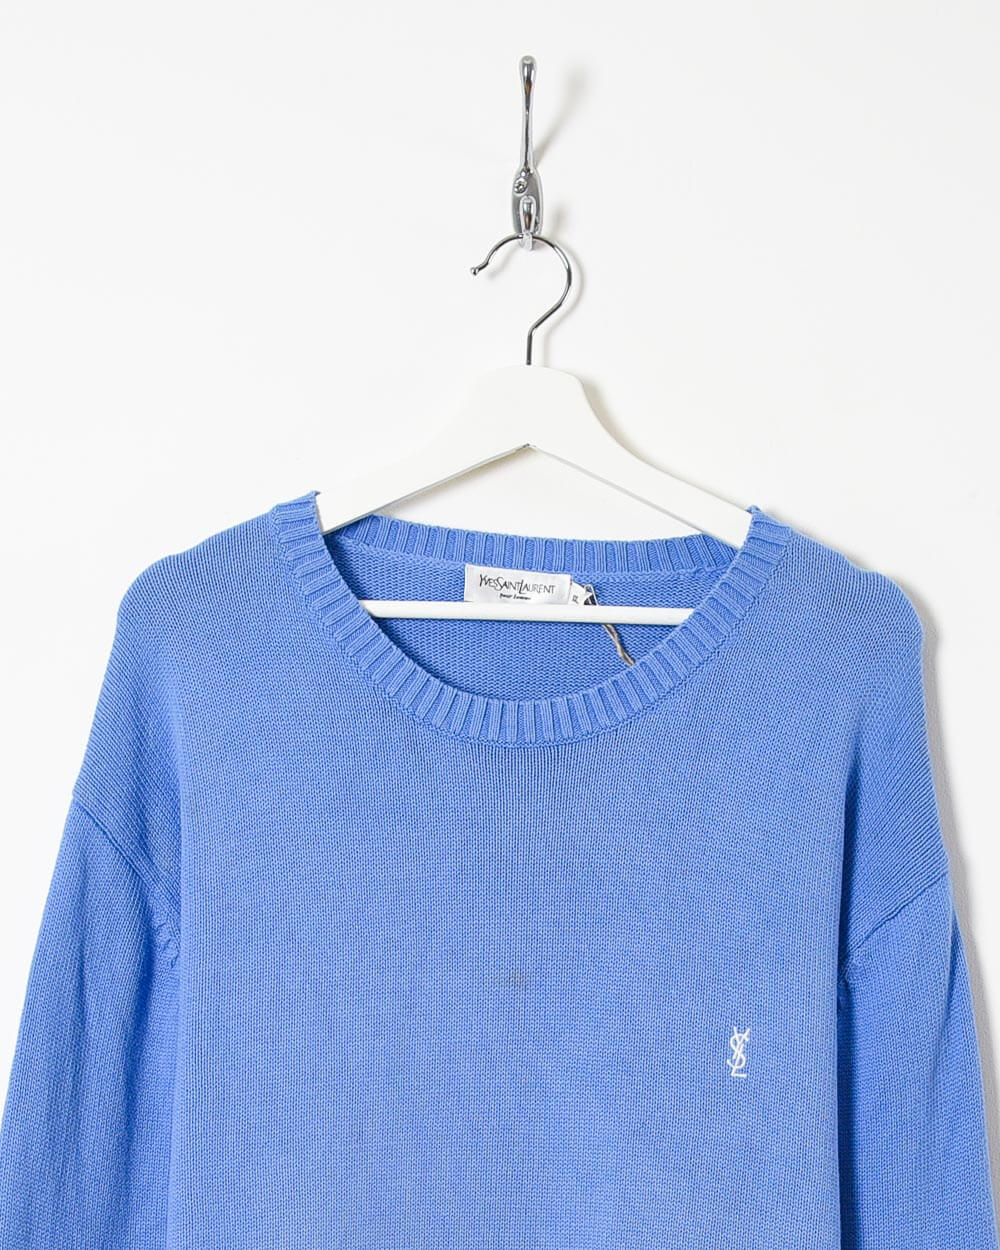 Yves Saint Laurent Knitted Sweatshirt - XX-Large - Domno Vintage 90s, 80s, 00s Retro and Vintage Clothing 